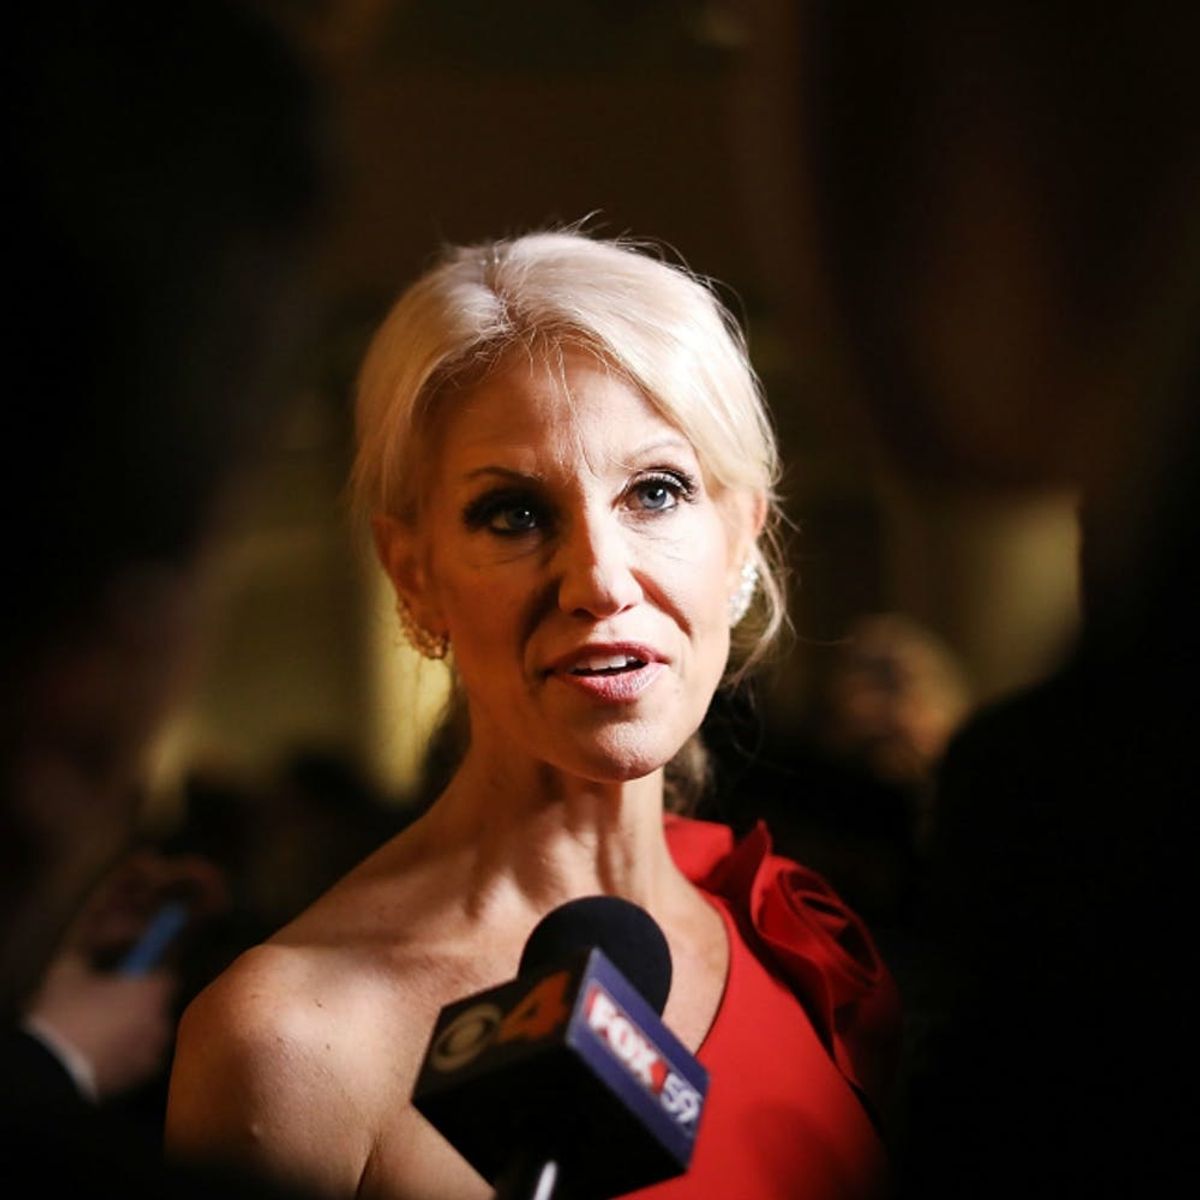 Kellyanne Conway Made Up a Tragic Event to Defend the Travel Ban